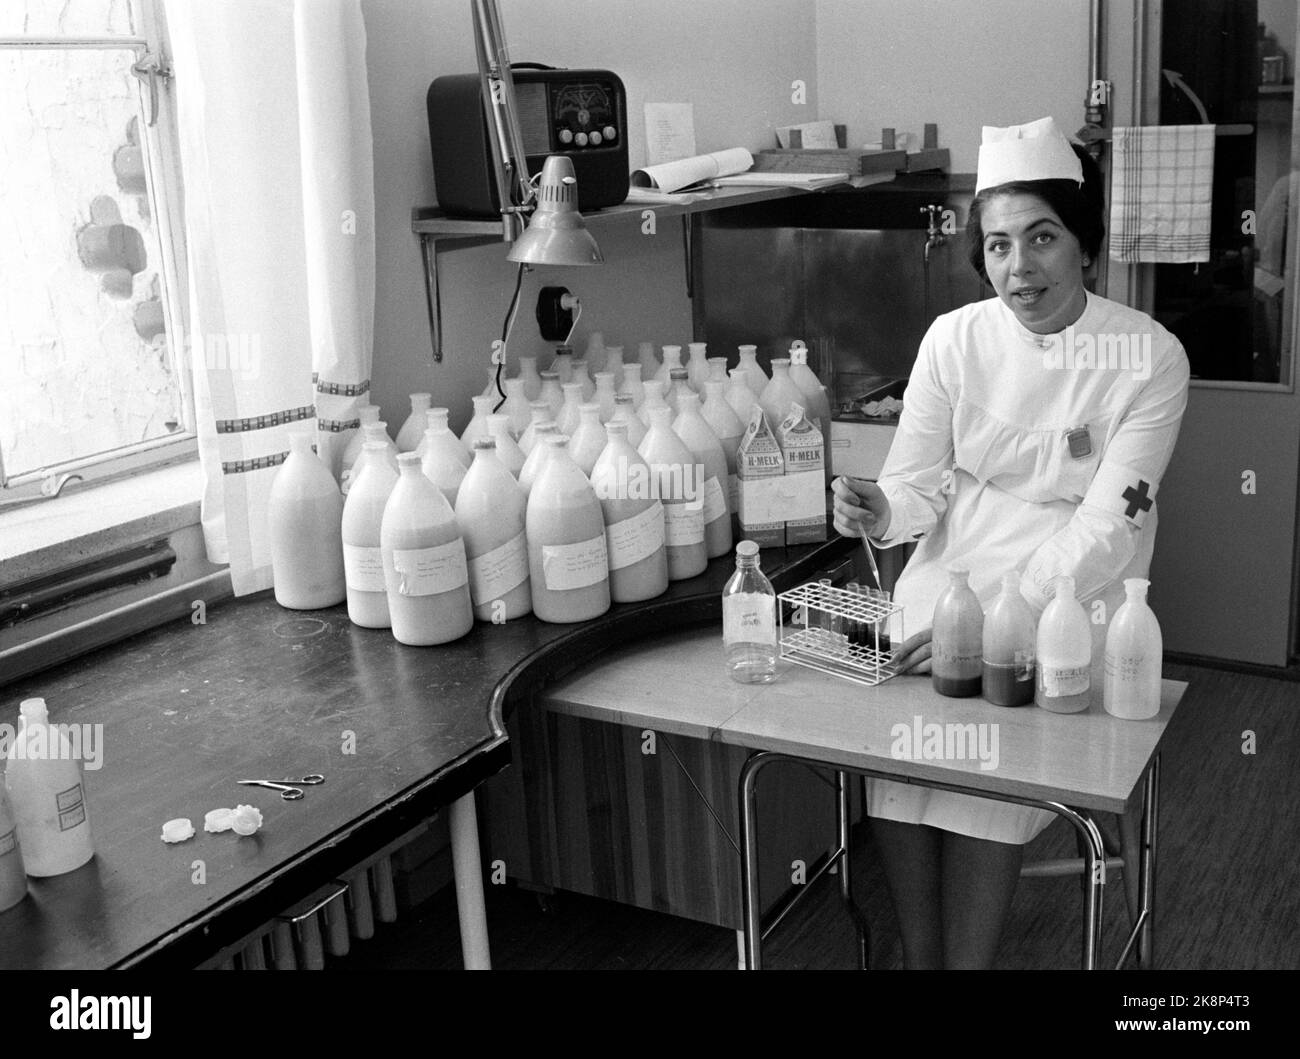 Oslo June 1962 After the Soviet start with nuclear test blasts, it has become necessary to control the content of radioactivity, such as the substances caesium and strontium 90 in i.a. milk. In the State Radiological physical laboratory at Ullern, Norway is radioactively mapped. Here, the Red Cross Sister Wenche Pedersen analyzes radioactivity in blood and milk. Photo: Aaserud / Current / NTB Stock Photo